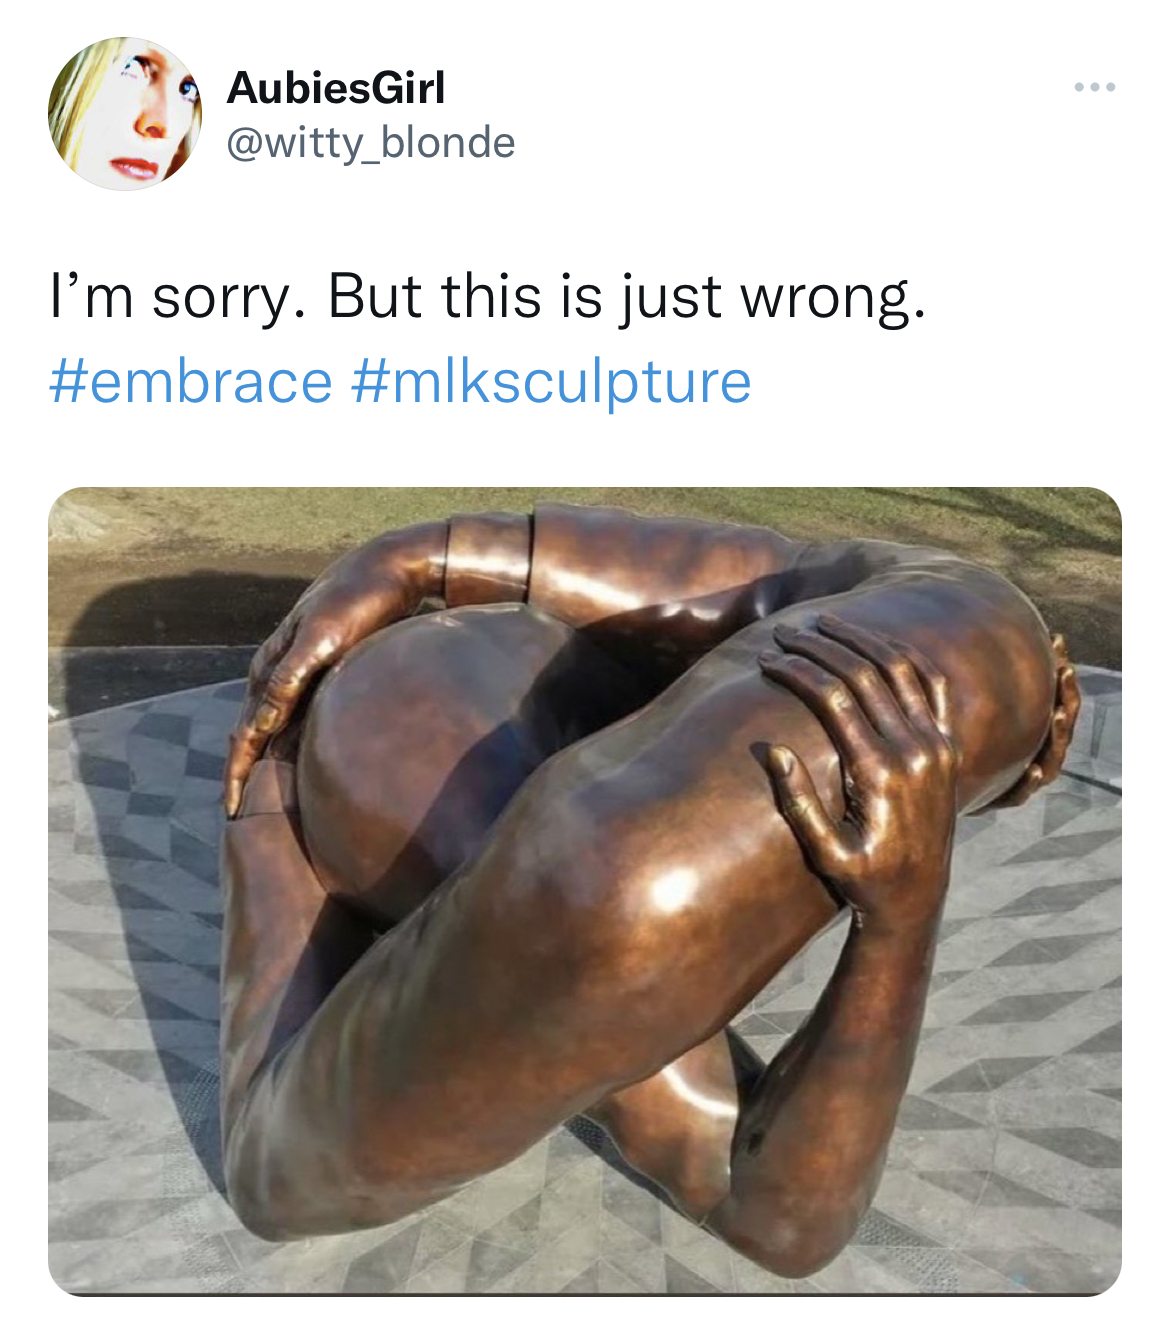 MLK Jr. Sculpture memes - metal - AubiesGirl I'm sorry. But this is just wrong.